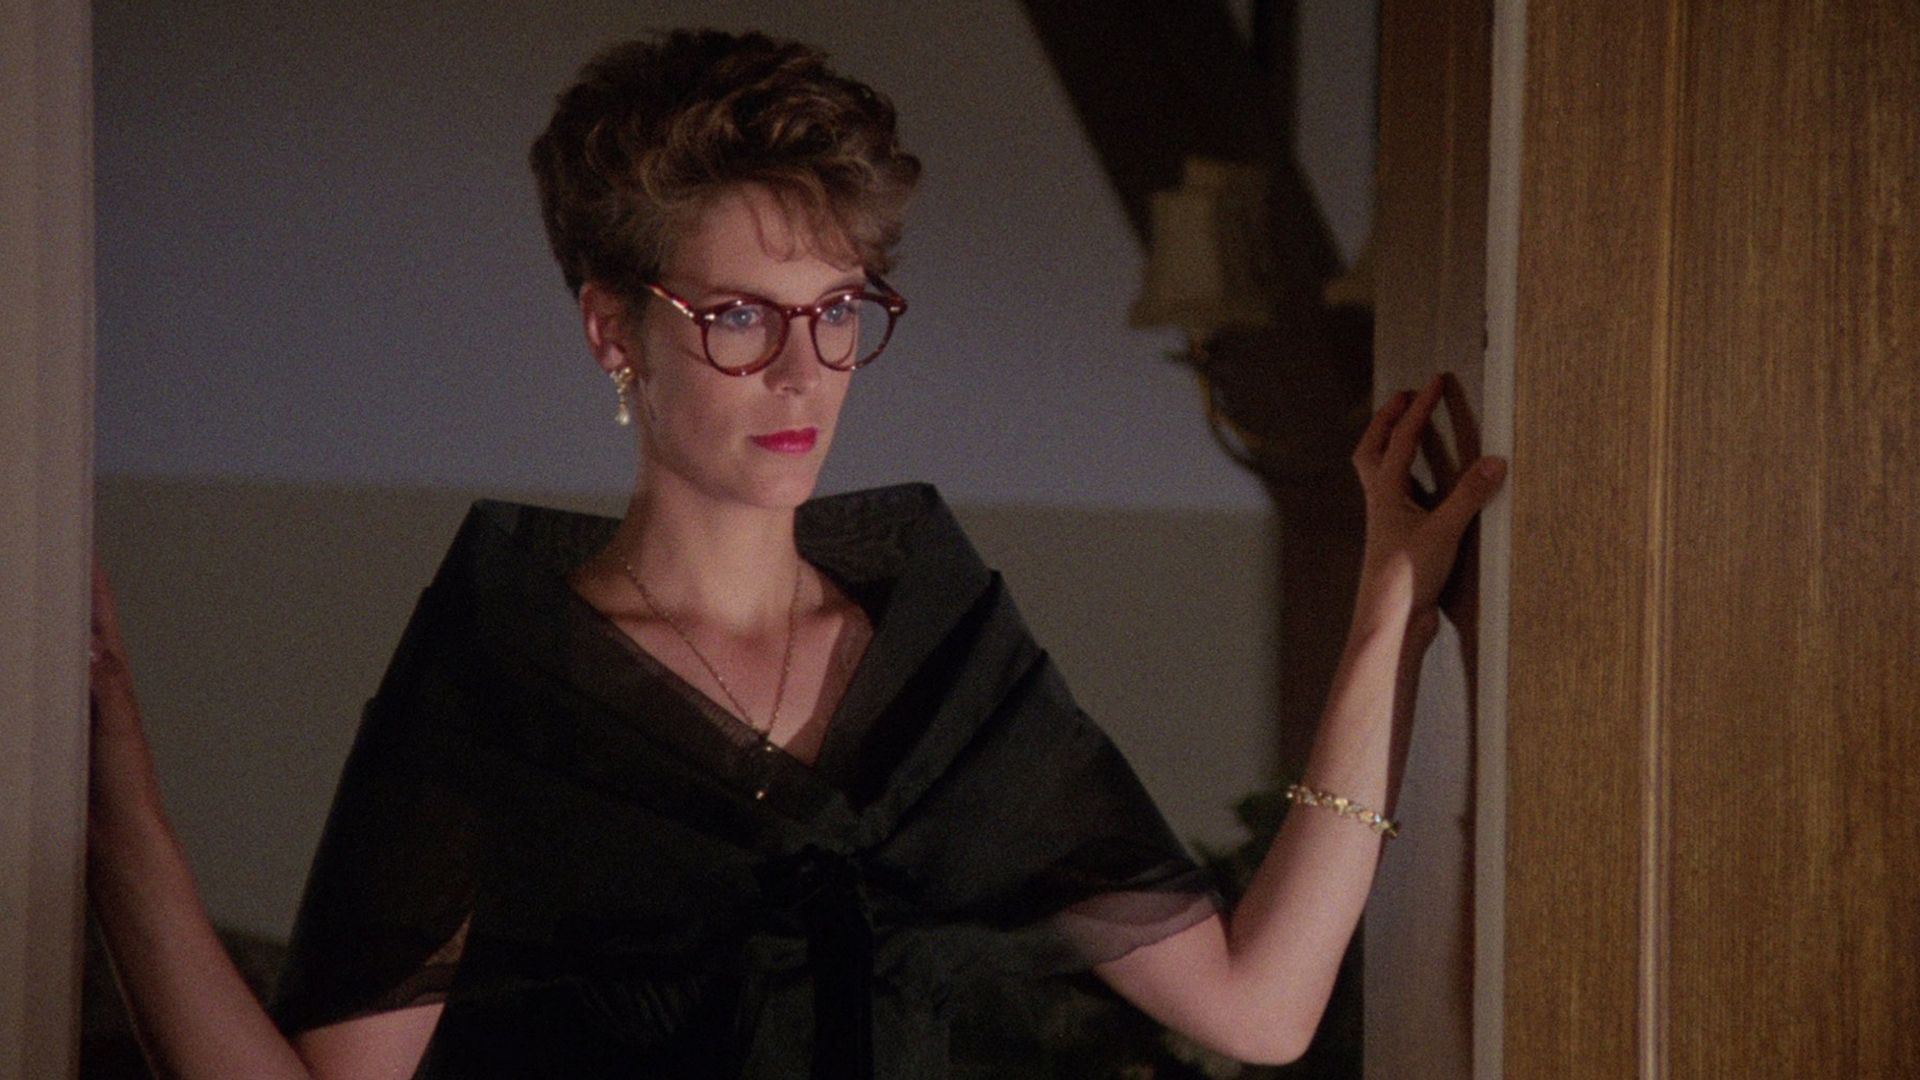 Jamie Lee Curtis in the movie 'A Fish Called Wanda'